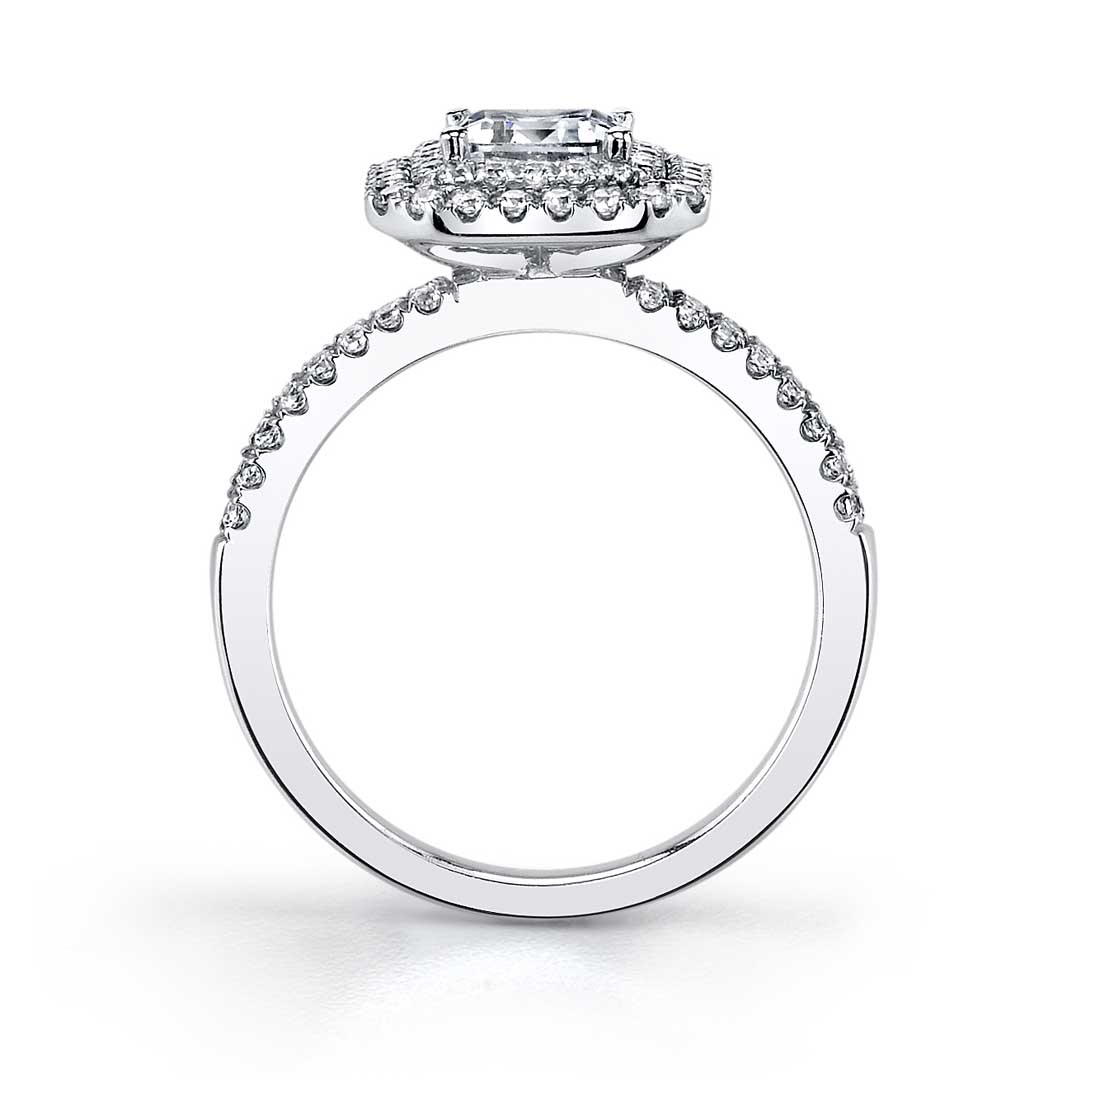 Profile image of an emerald cut double halo engagement ring